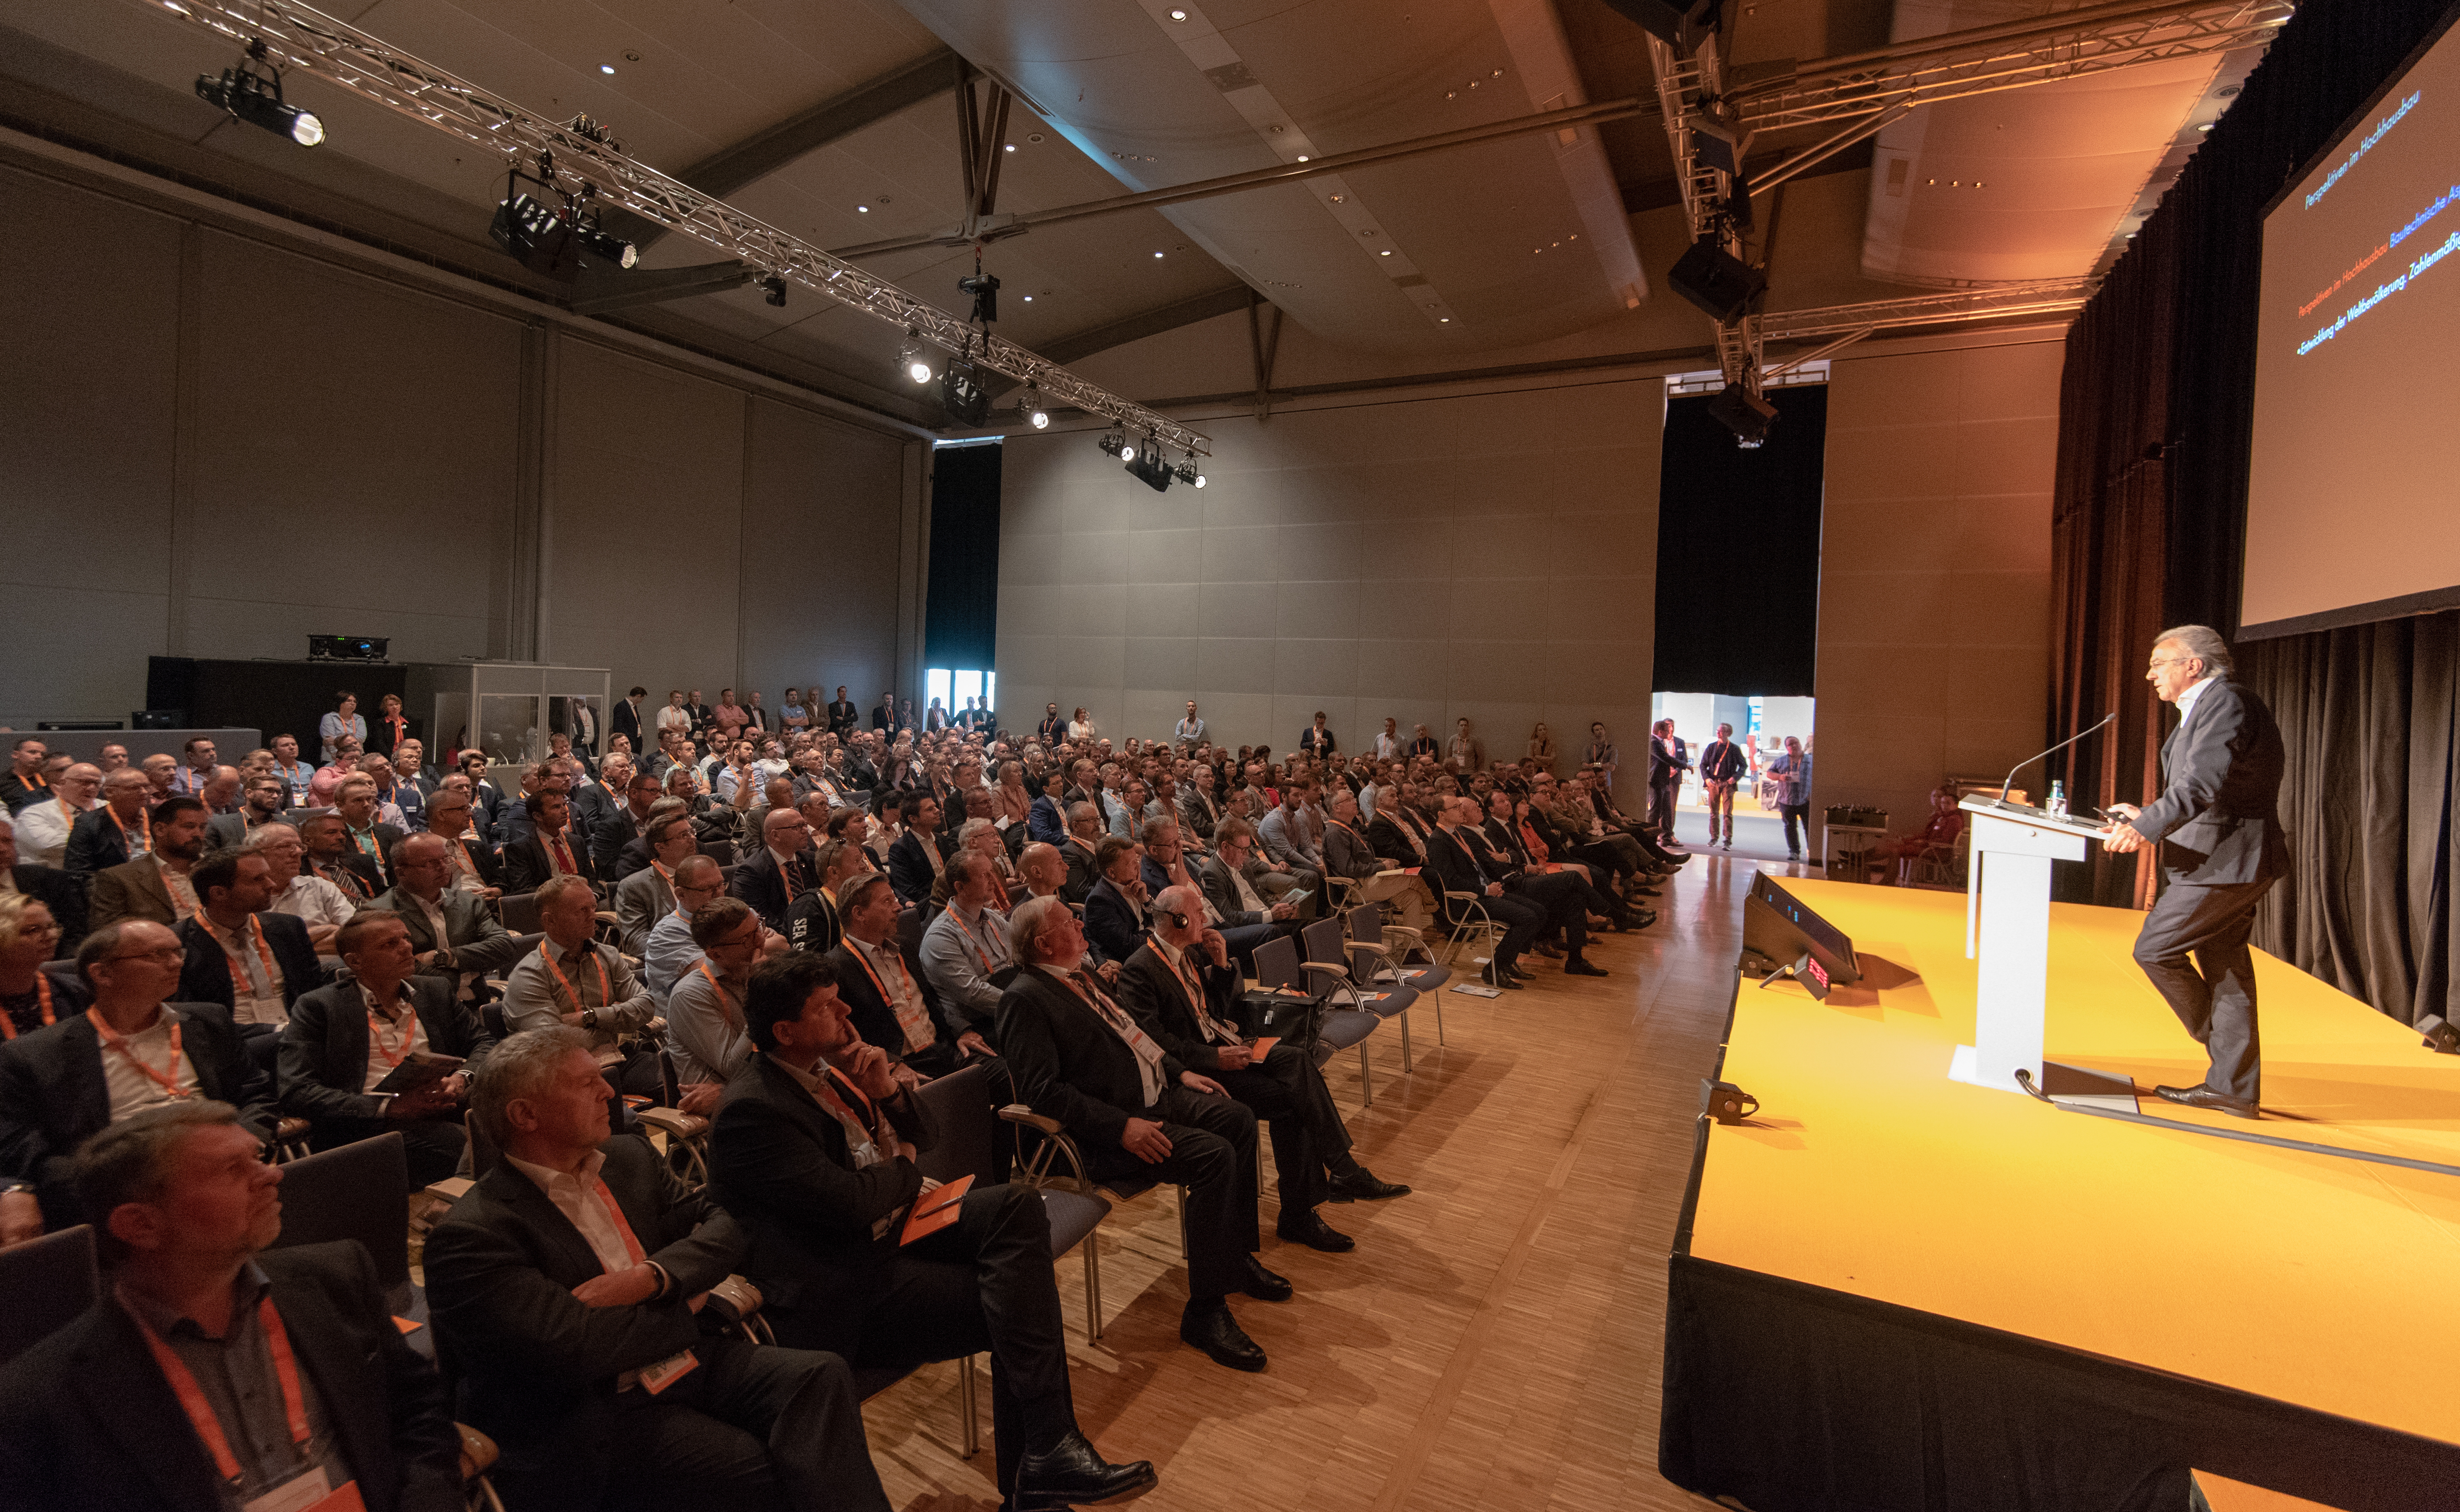 E2 Forum announces its conference programme: more than 40 presentations and discussion panels on future scenarios in the elevator and escalator industry